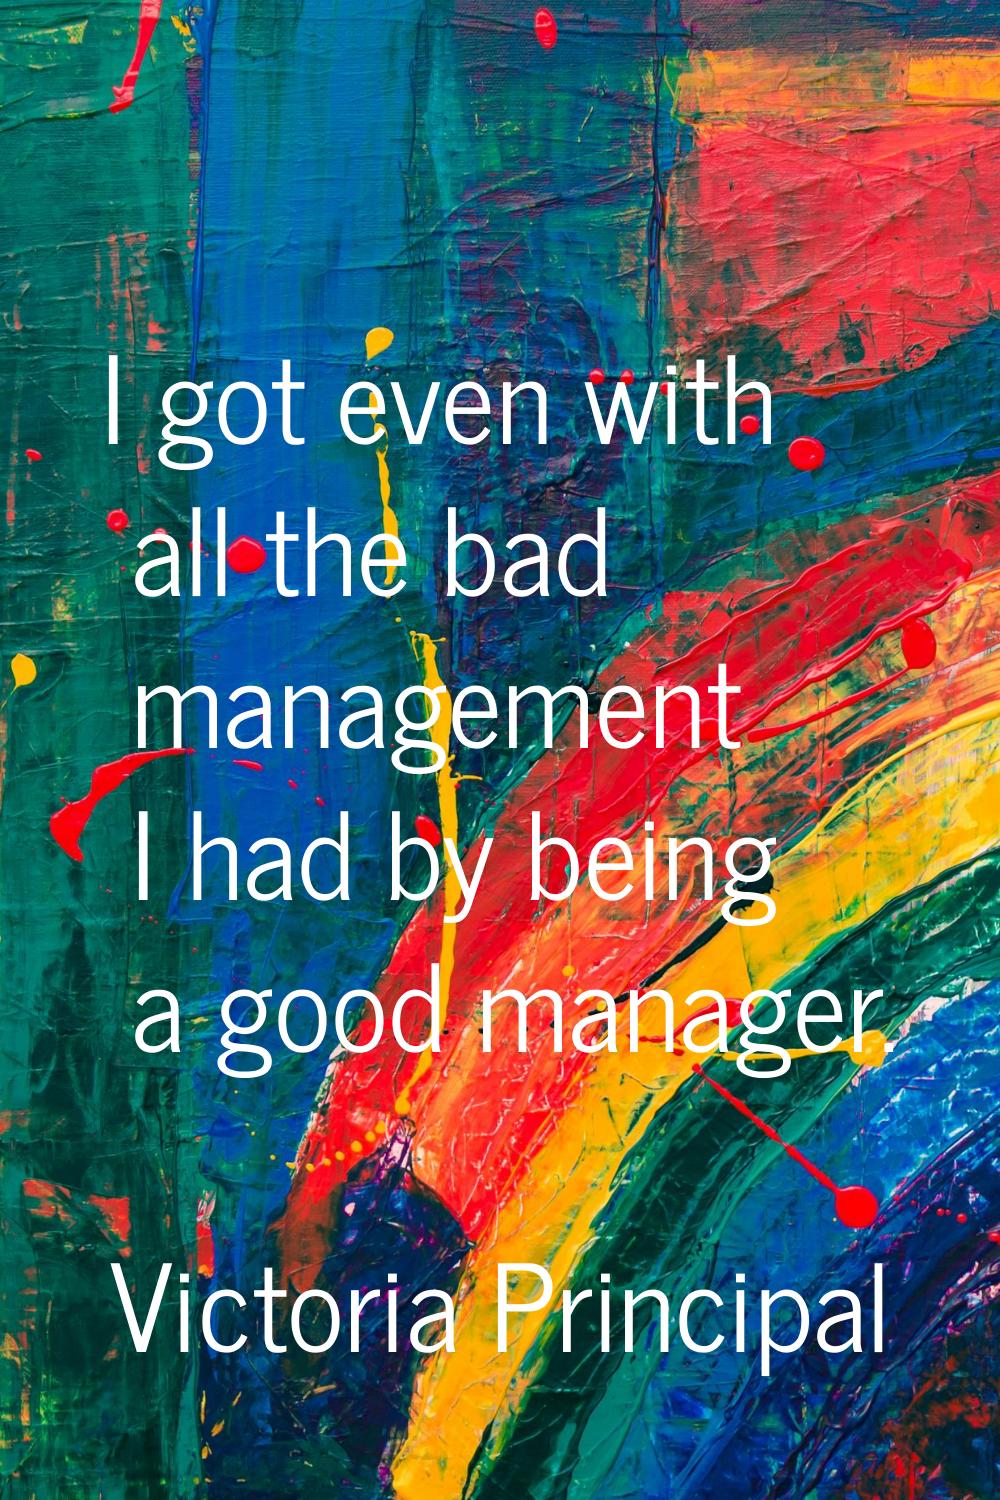 I got even with all the bad management I had by being a good manager.